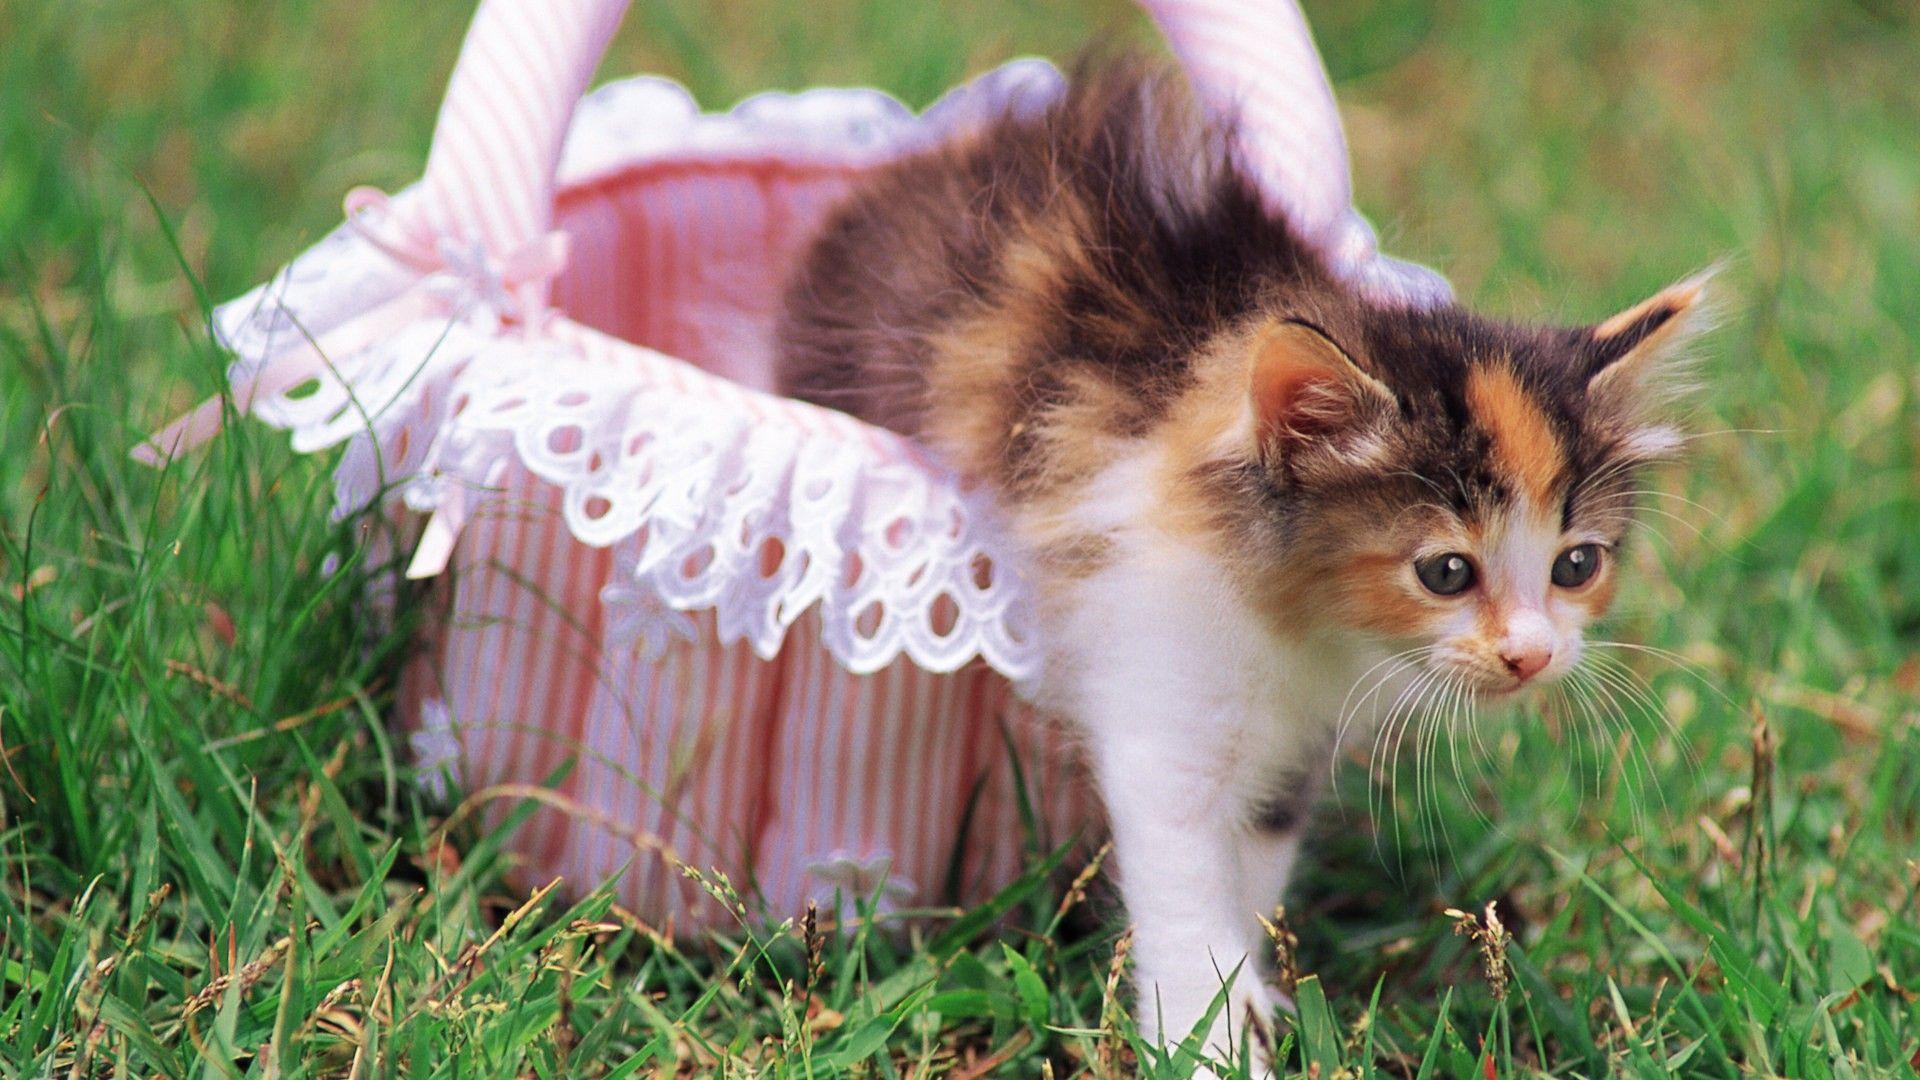 Calico Kittens HD Wallpaper, Background Image